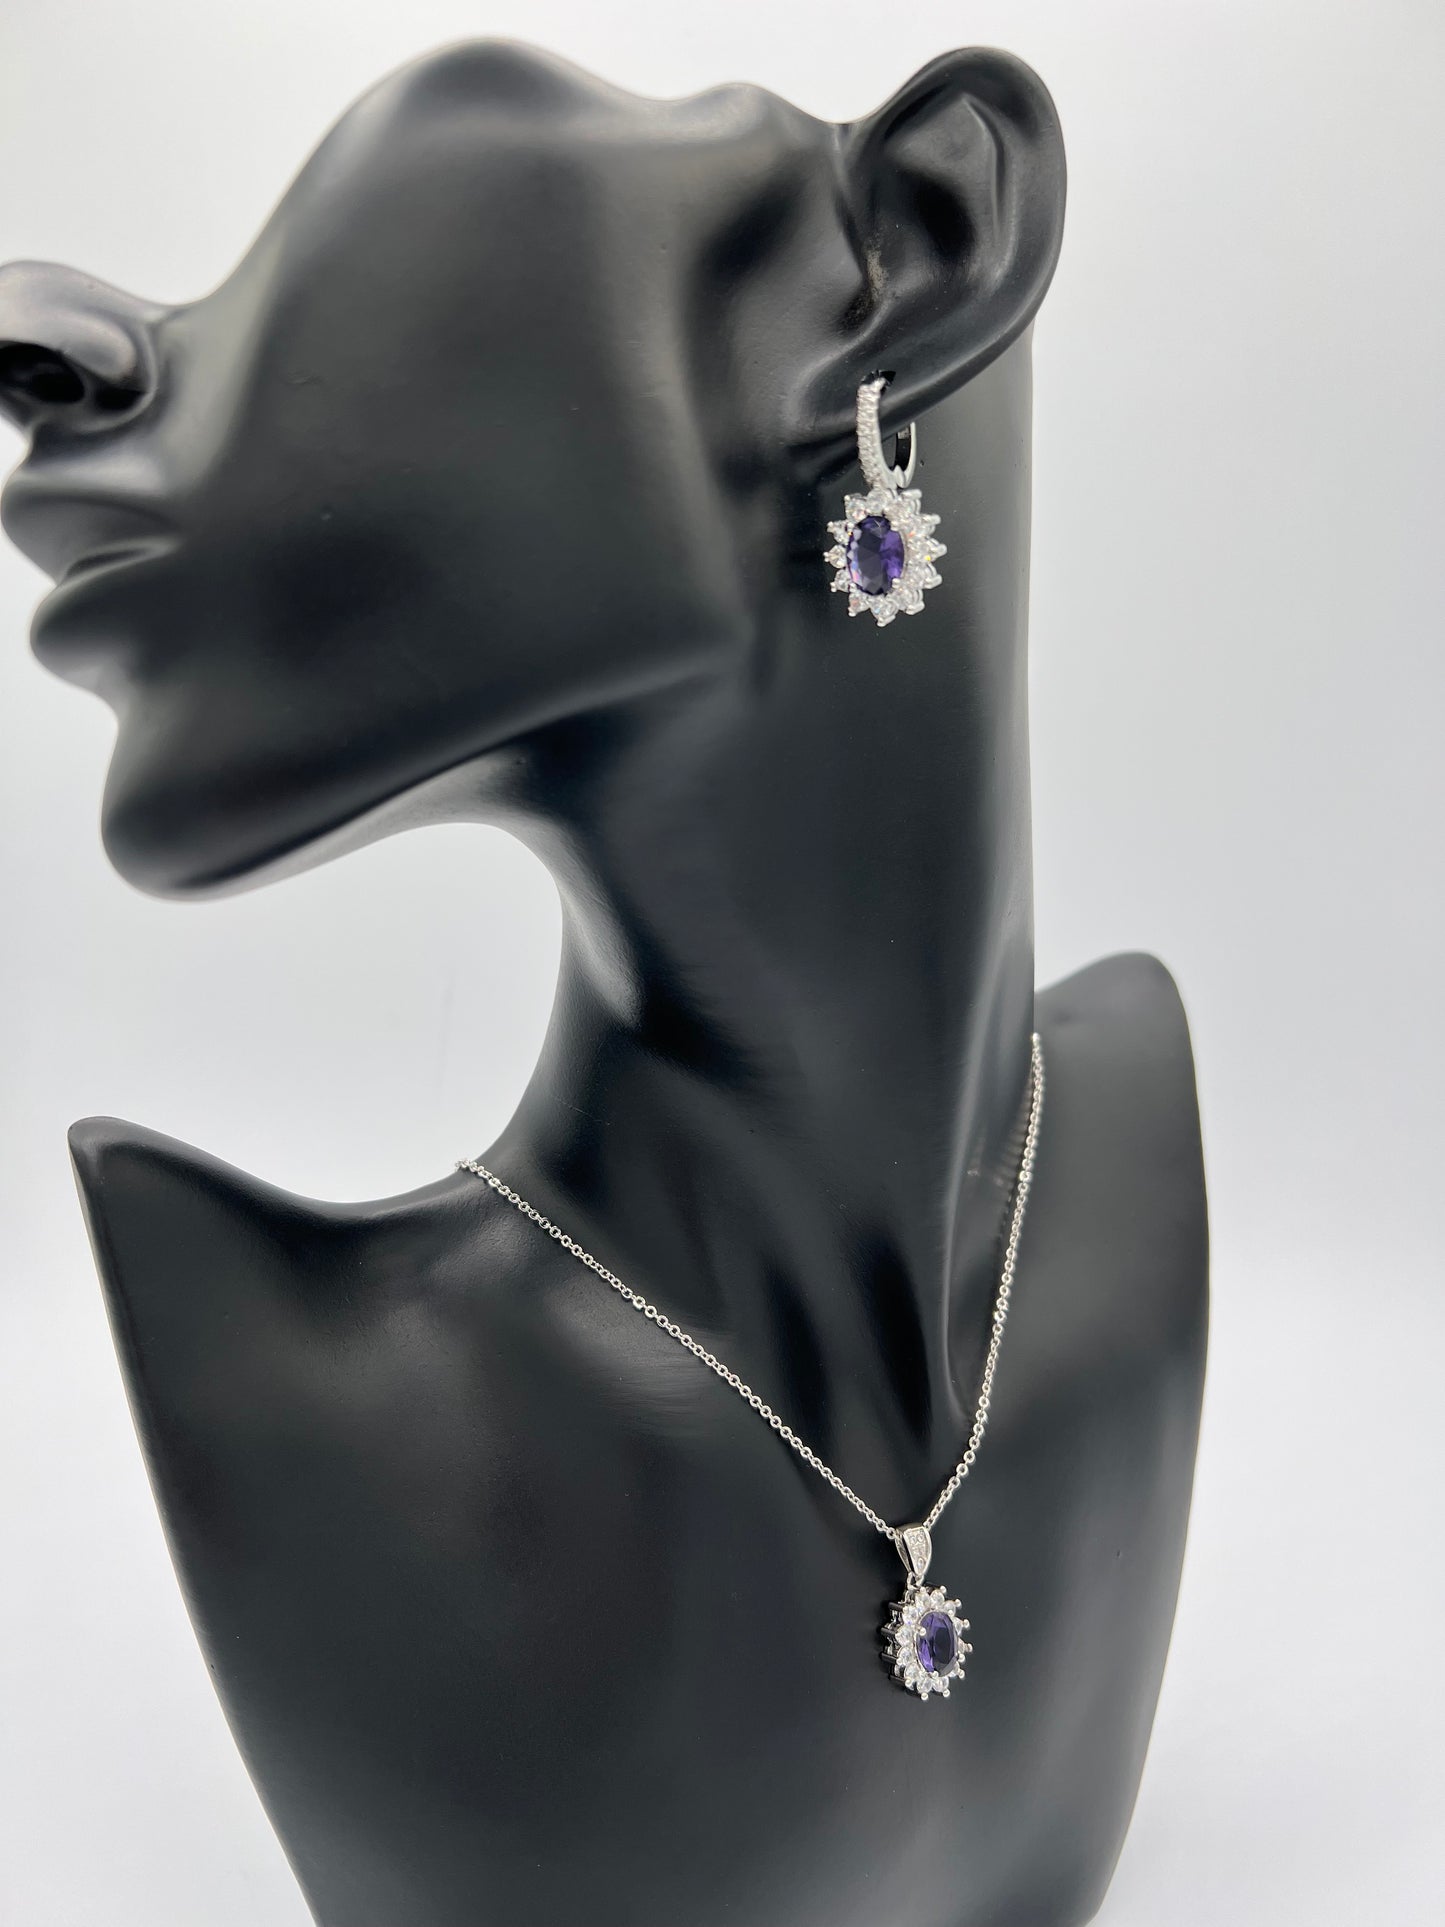 Oval Shape Amethyst Or Blue Sapphire Color Earrings And Necklace Sets